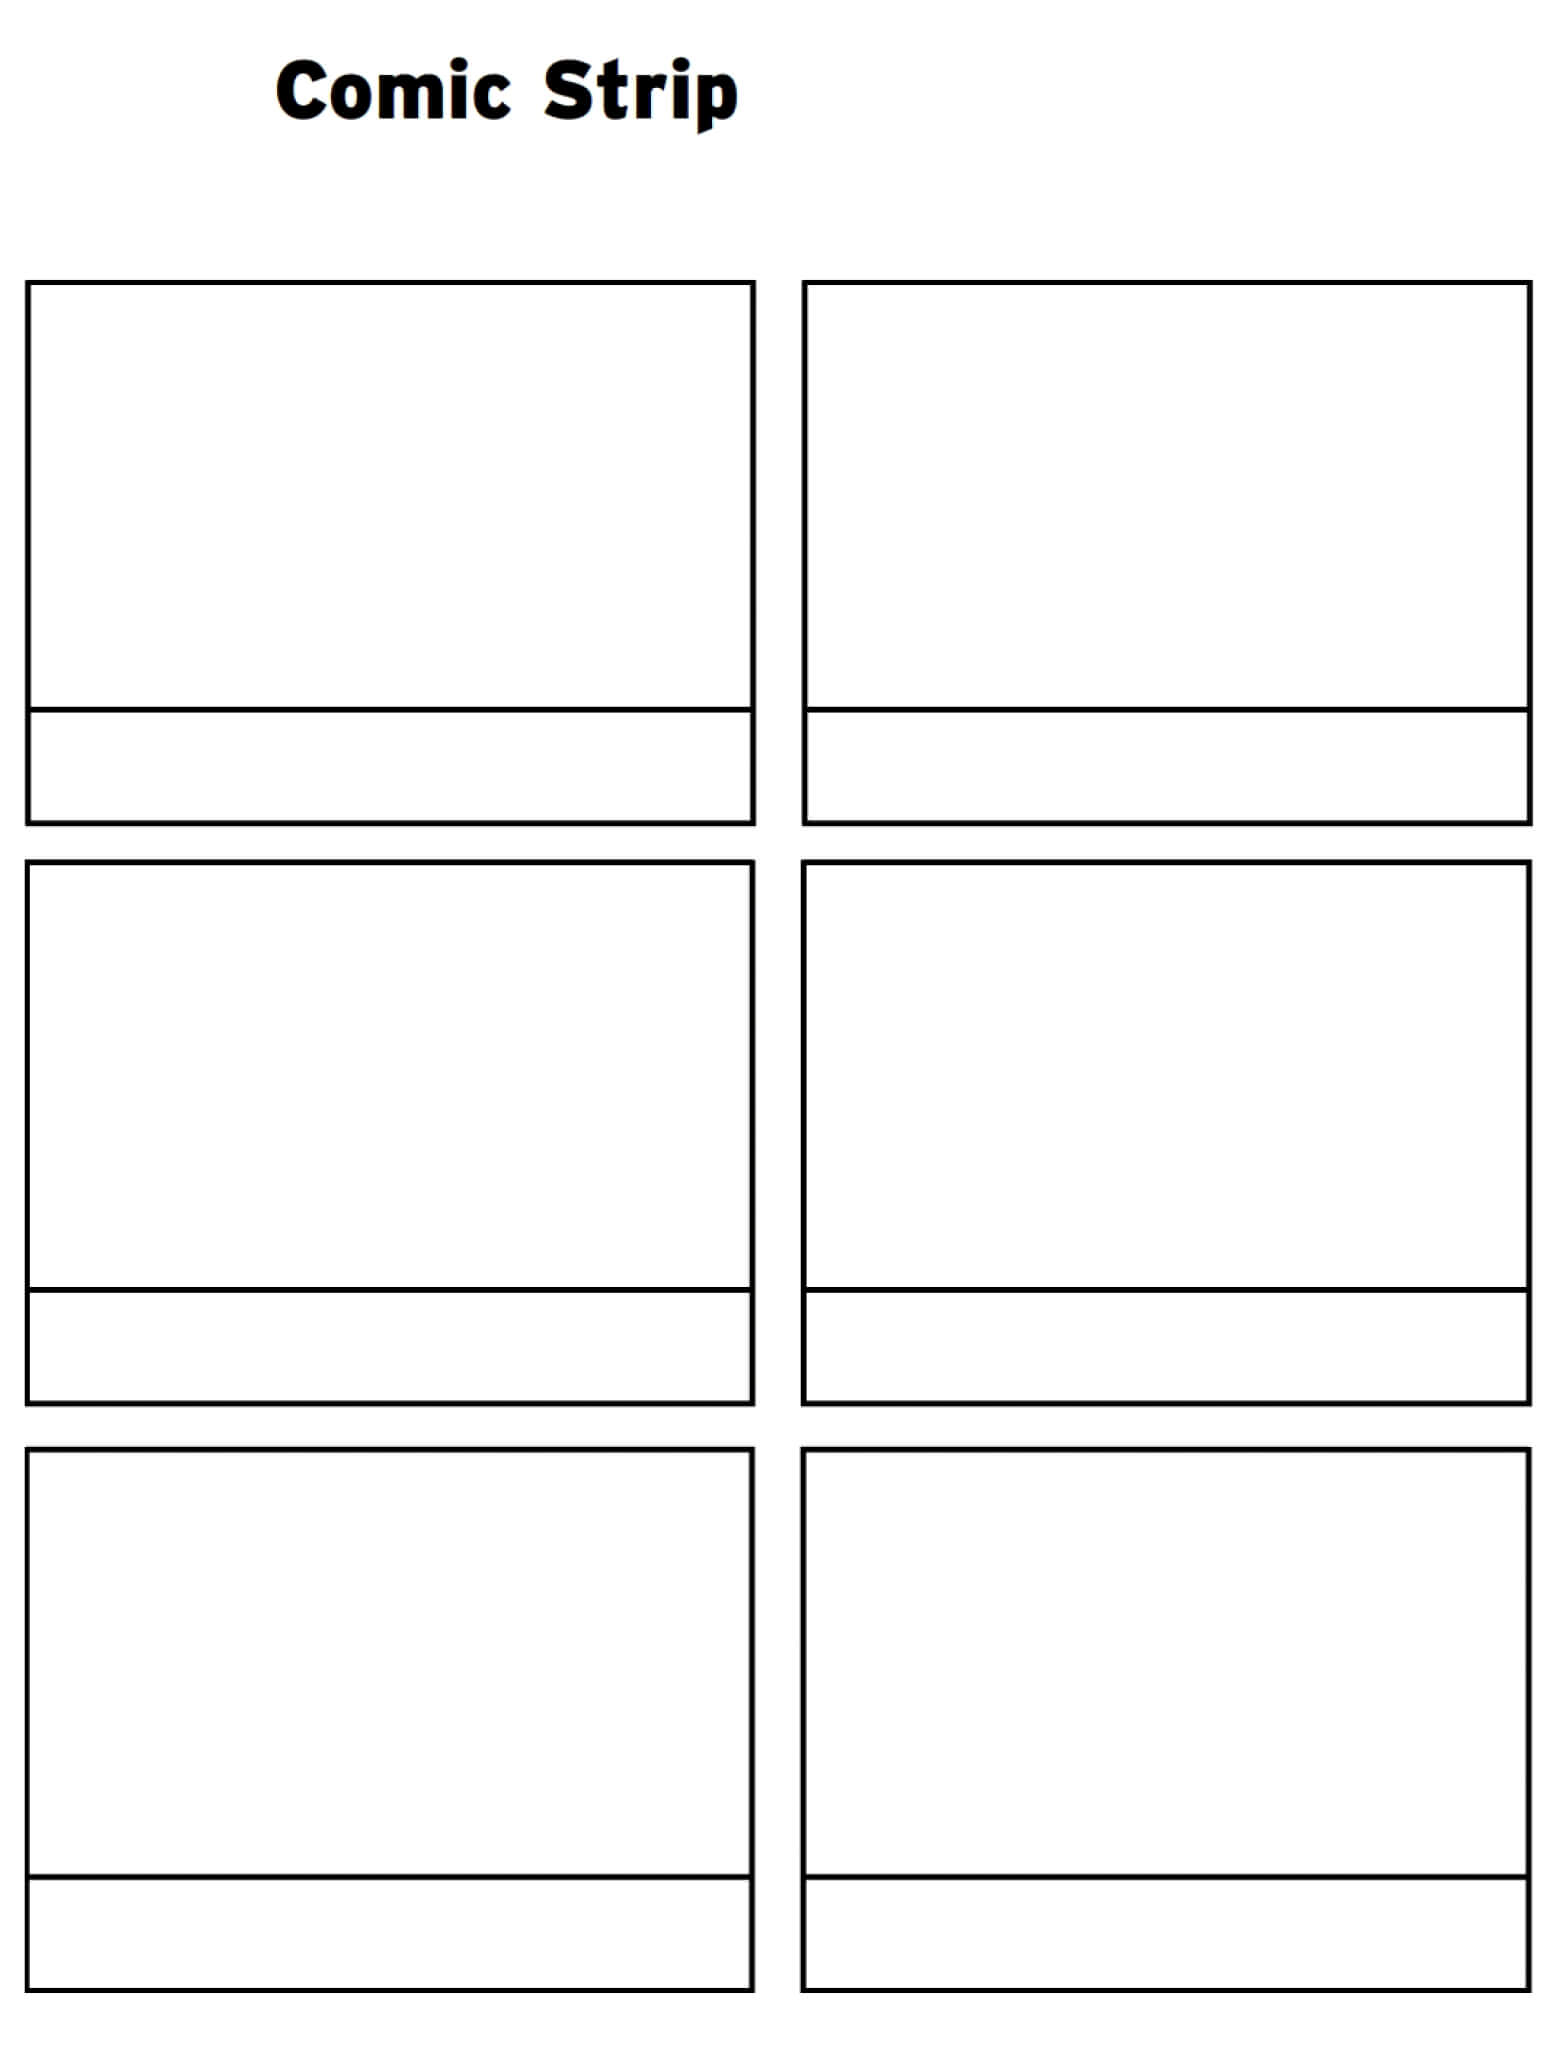 Printable Comic Strip Template Pdf Word Pages | Printable With Regard To Printable Blank Comic Strip Template For Kids